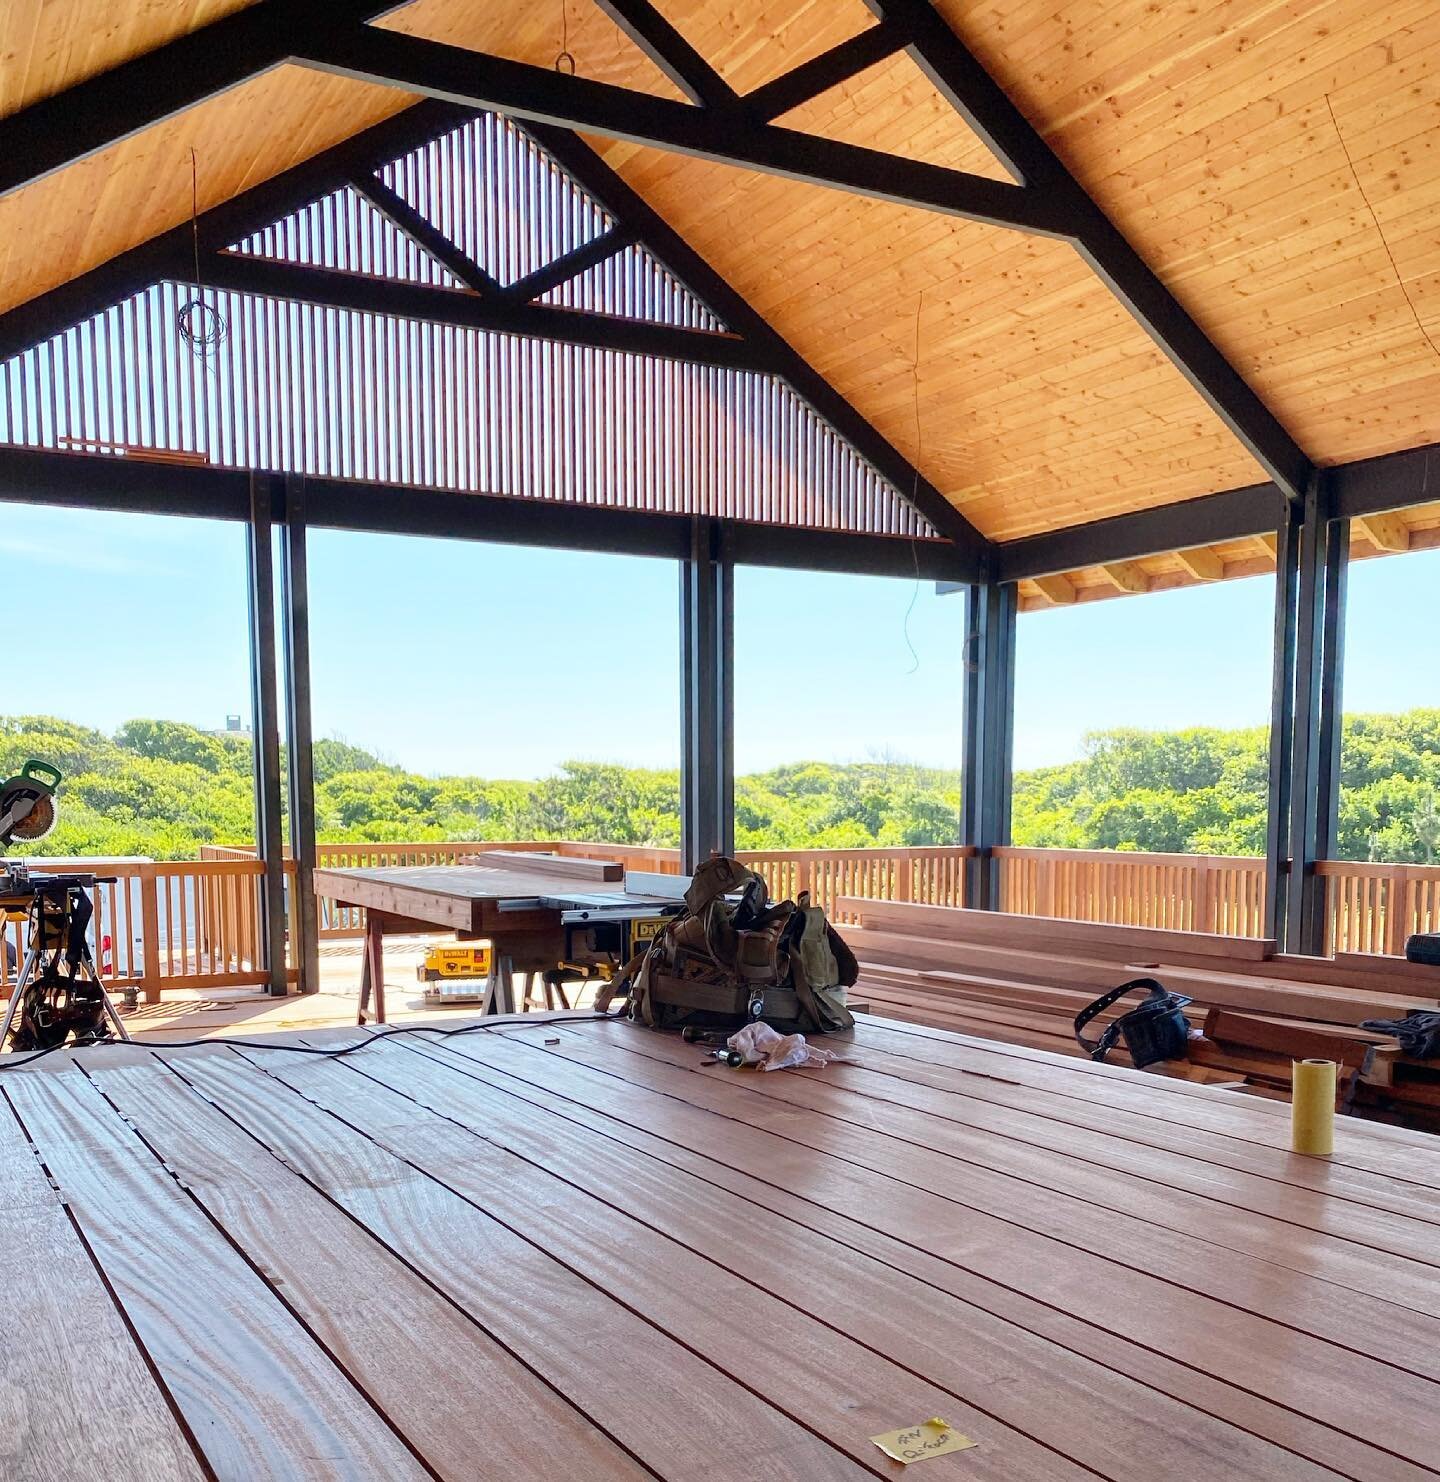 Nearing the end of this unique and fun beach club project, just in time for July 4th!! #wip
.
@petercookarchitect 
@whiteoakbuilders 
.

.

.

#whiteoakbuilders #hamptons #thehamptons #architecture #interiordesign #southampton #watermill #bridgehampt